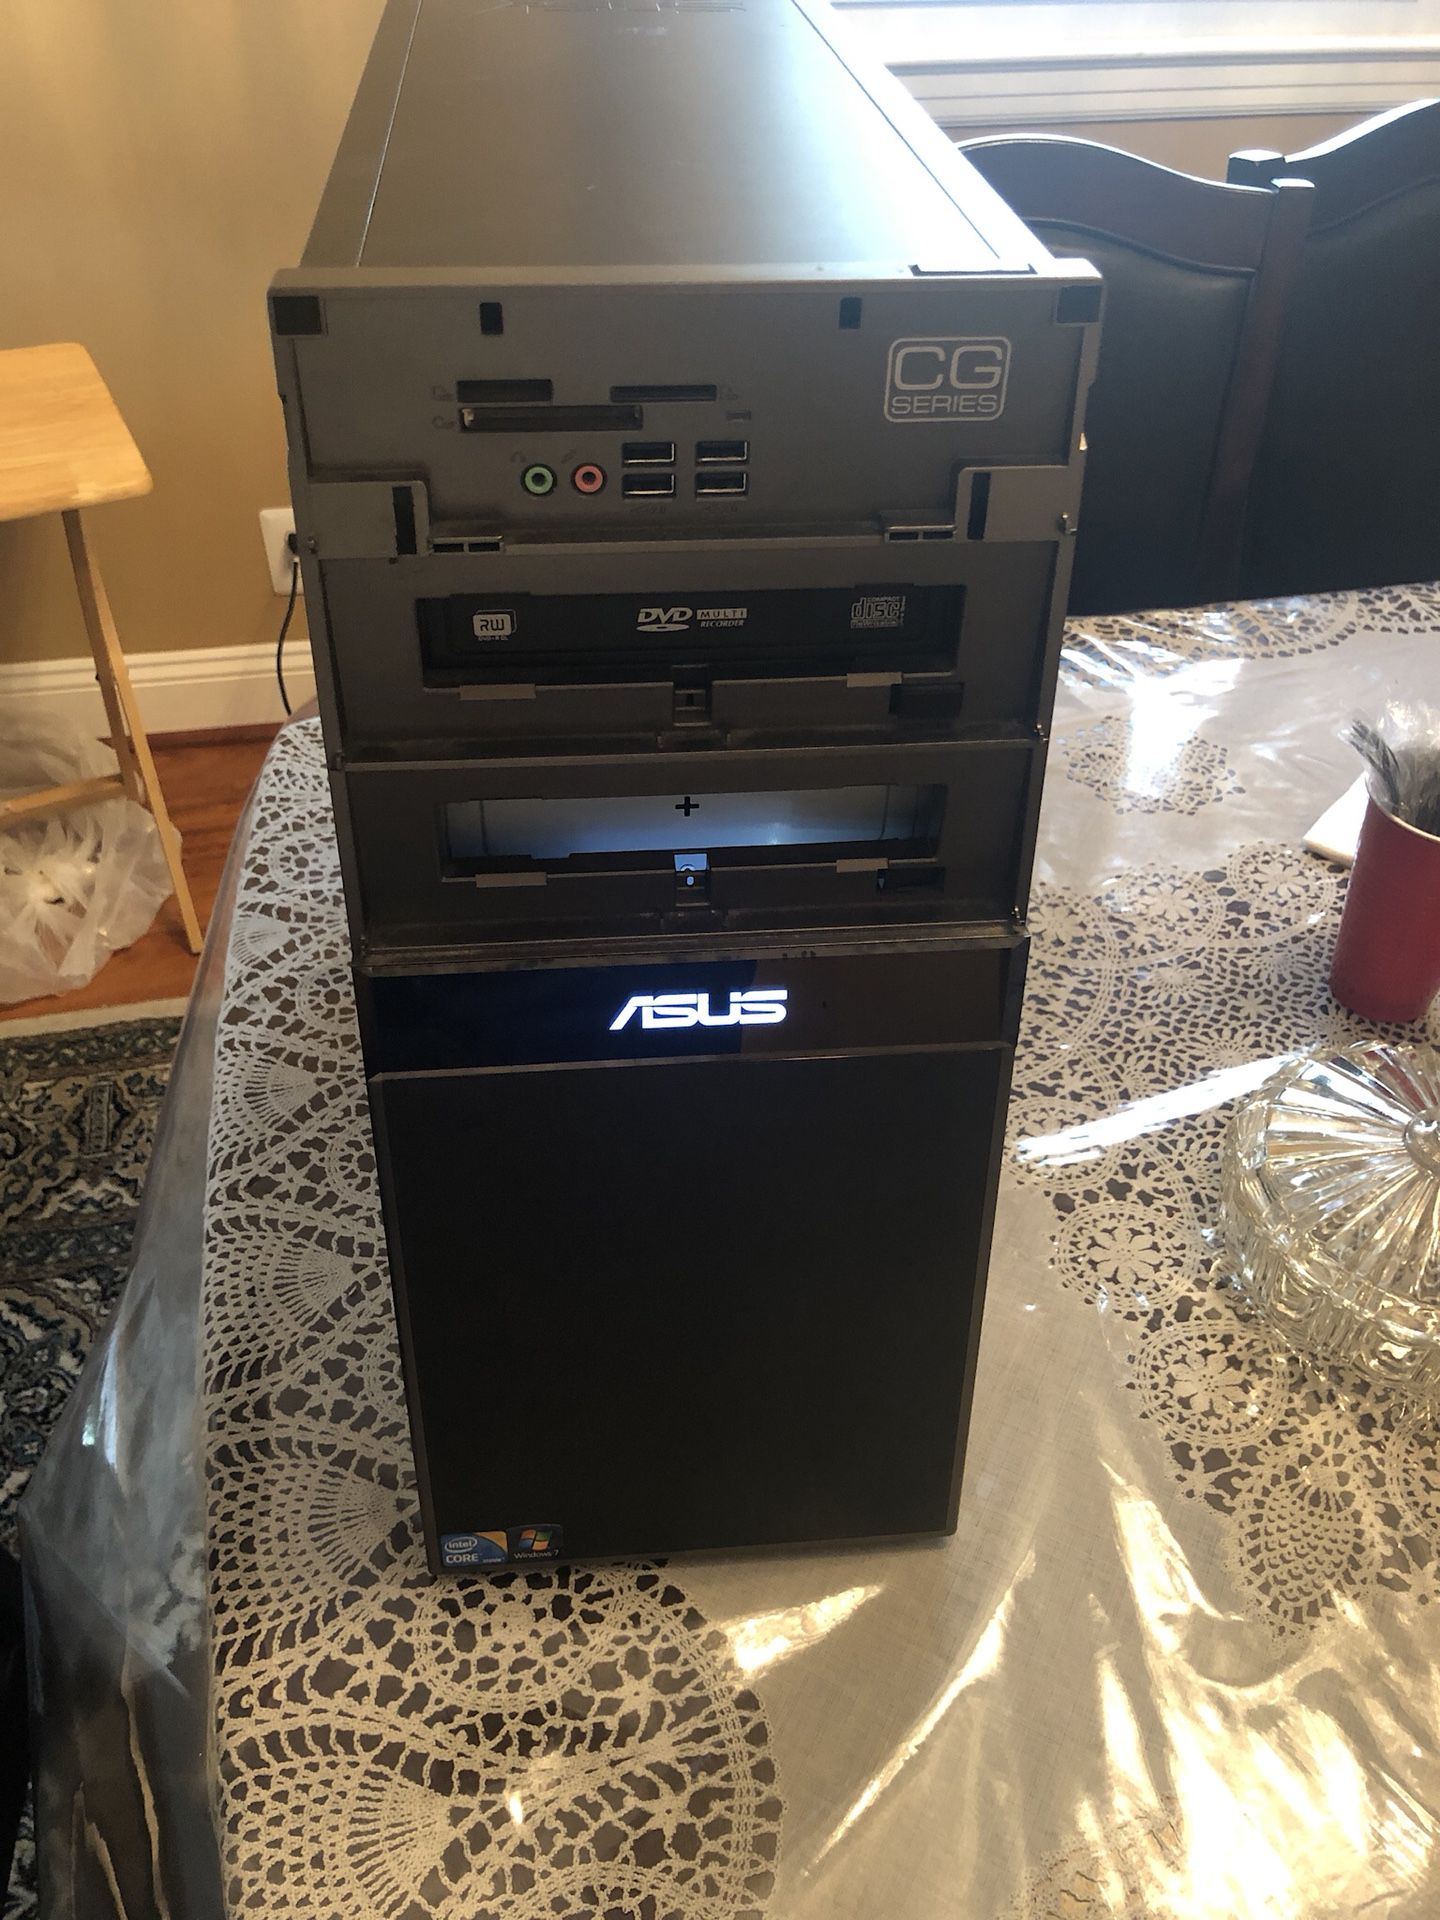 ASUS PC Tower